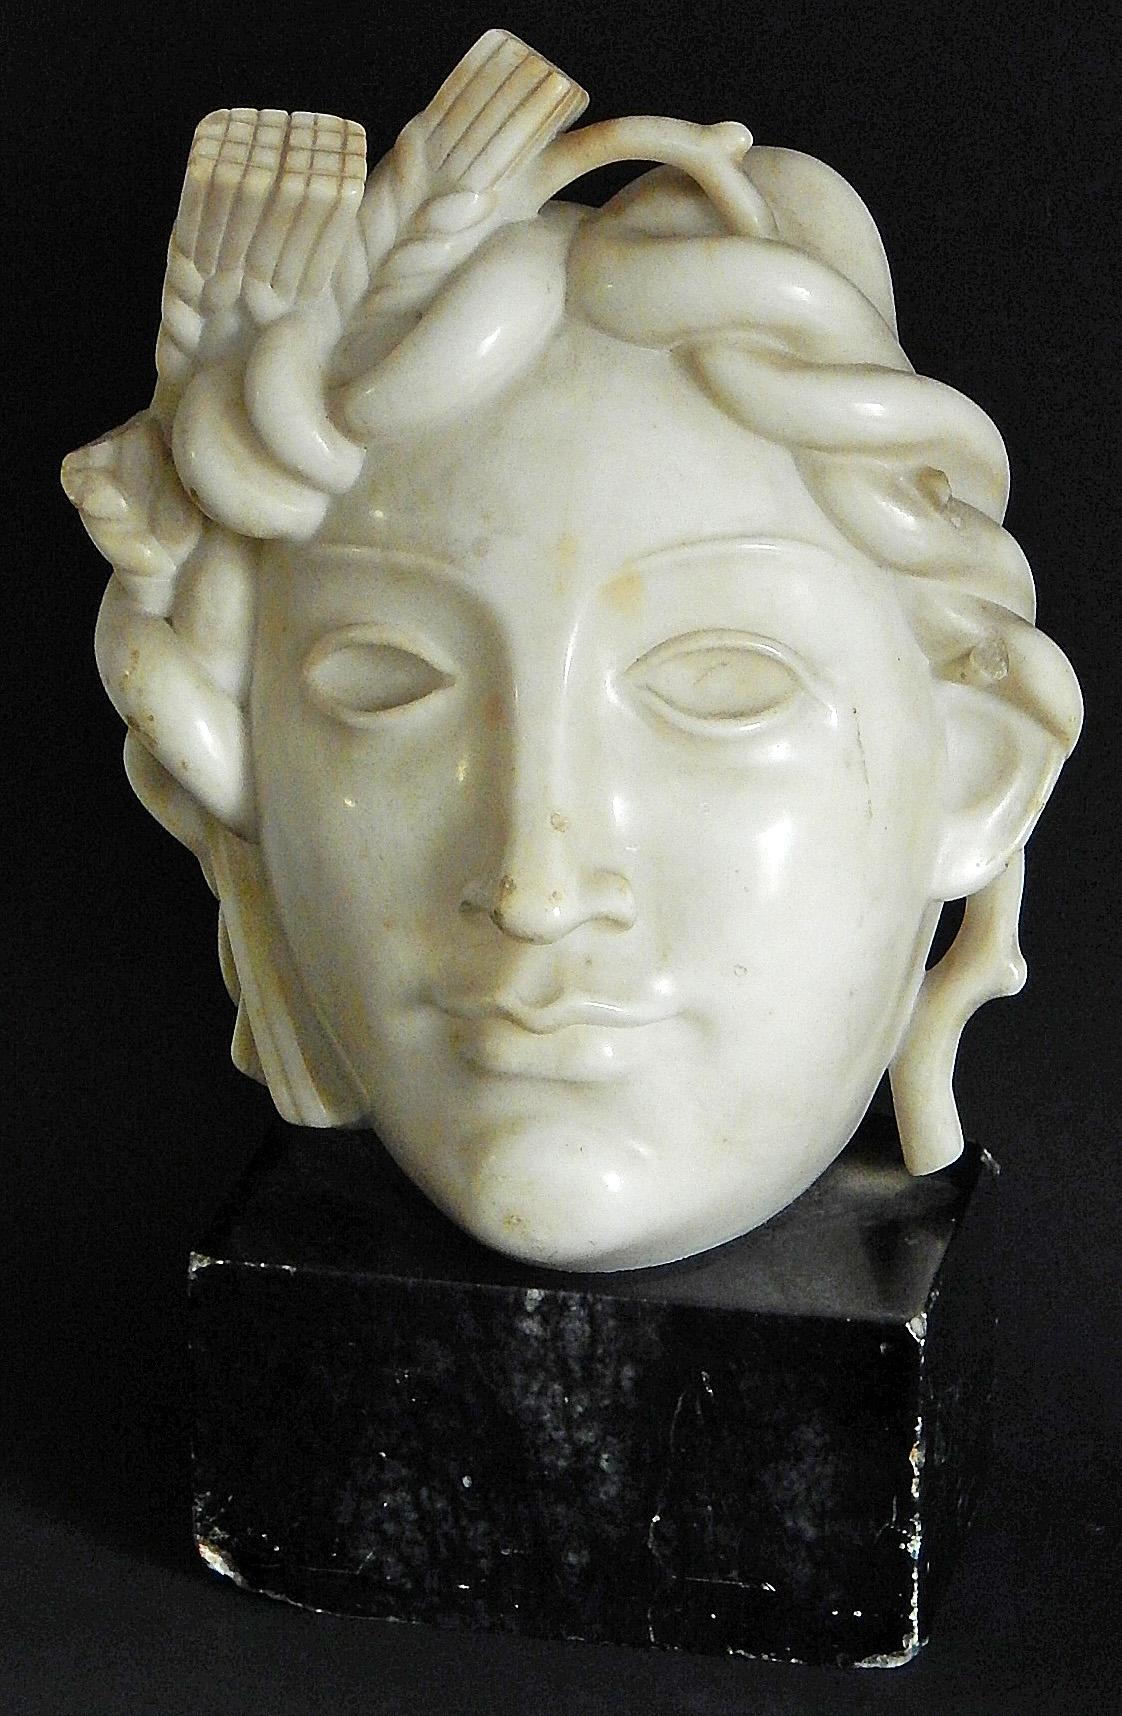 Exquisitely sculpted from a block of pale white marble, this very fine depiction of Ceres, goddess of the harvest, agriculture and fertility, is one of the finest Art Deco pieces we have ever offered. The hair of Ceres is woven with strands of